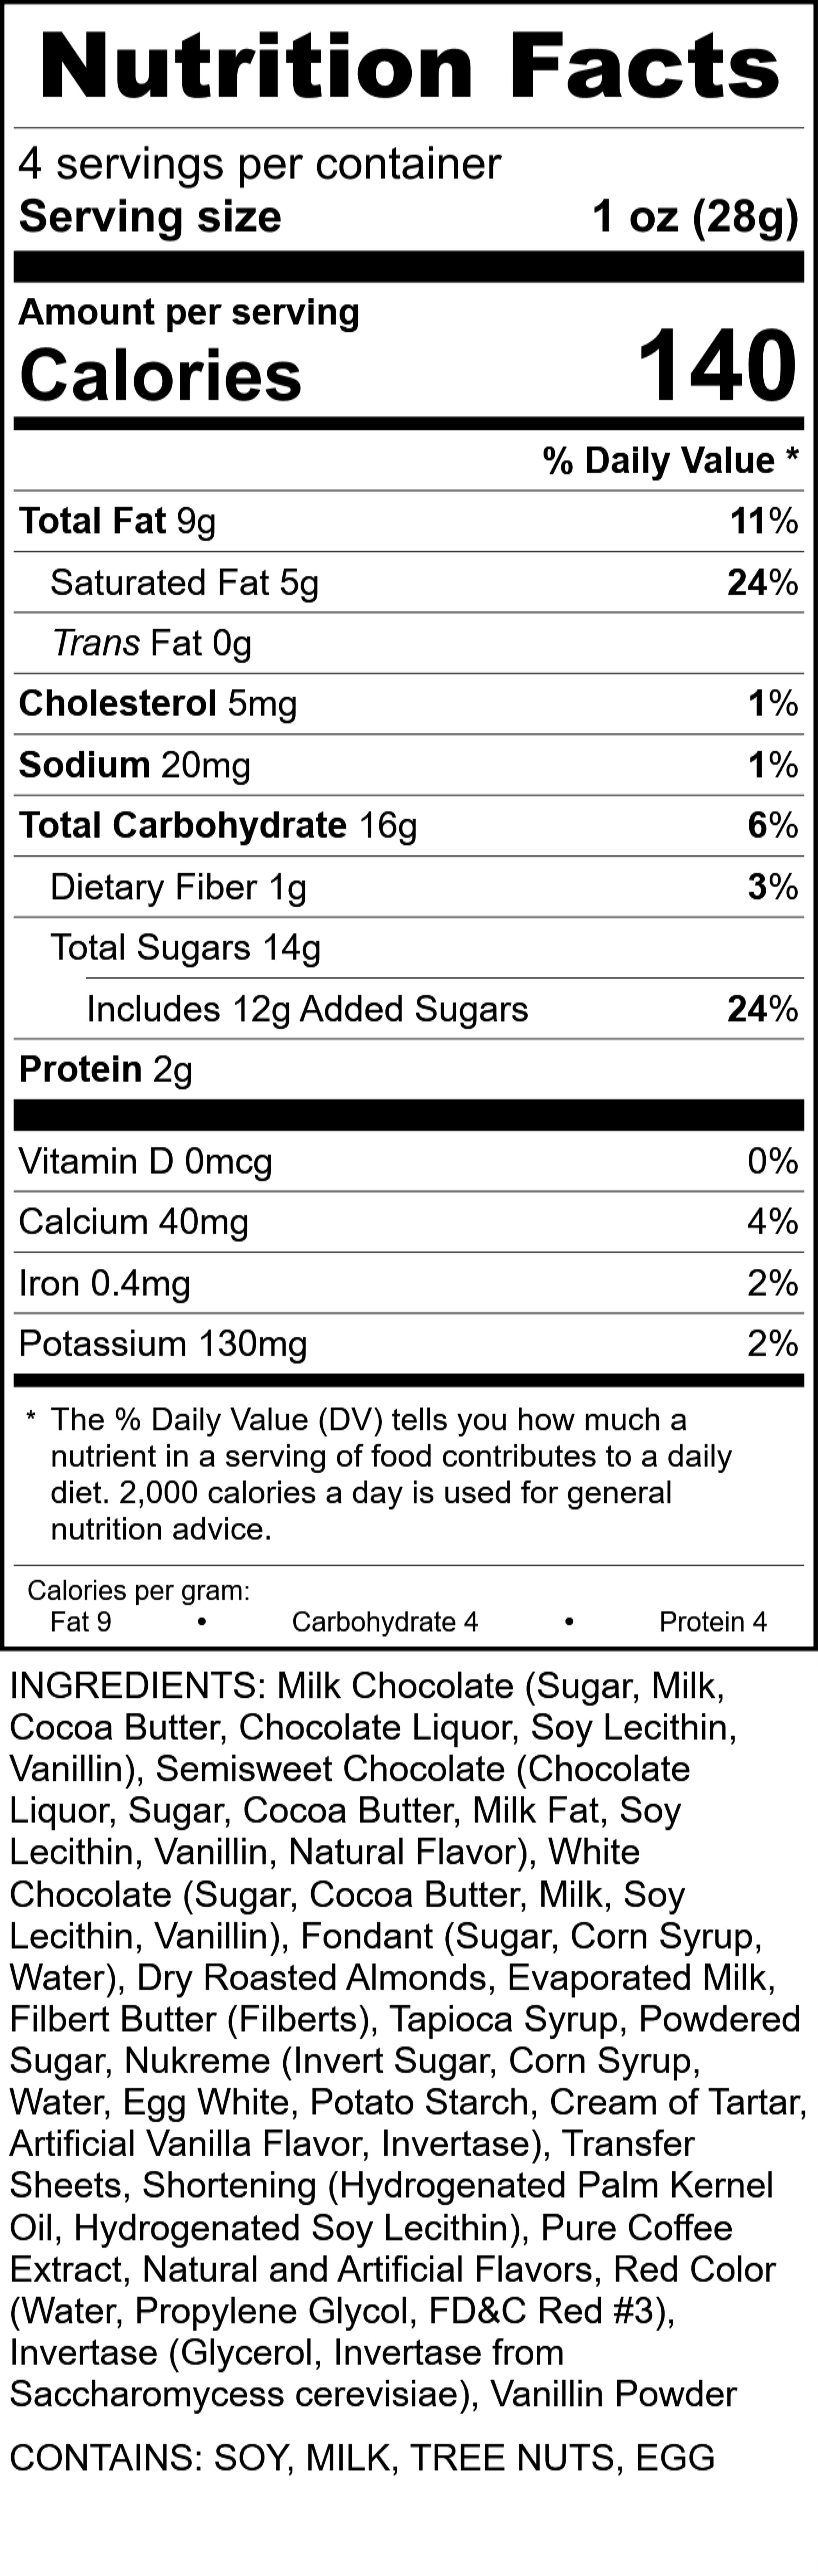 Nutrition Facts - 8pc NYC Box
CONTAINS: SOY, MILK, TREE NUTS, EGG

INGREDIENTS: Milk Chocolate (Sugar, Milk, Cocoa Butter, Chocolate Liquor, Soy Lecithin, Vanillin), Semisweet Chocolate (Chocolate Liquor, Sugar, Cocoa Butter, Milk Fat, Soy Lecithin, Vanillin, Natural Flavor), White Chocolate (Sugar, Cocoa Butter, Milk, Soy Lecithin, Vanillin), Fondant (Sugar, Corn Syrup, Water), Dry Roasted Almonds, Evaporated Milk, Filbert Butter (Filberts), Tapioca Syrup, Powdered Sugar, Nukreme (Invert Sugar, Corn Syrup, Water, Egg White, Potato Starch, Cream of Tartar, Artificial Vanilla Flavor, Invertase), Transfer Sheets, Shortening (Hydrogenated Palm Kernel Oil, Hydrogenated Soy Lecithin), Pure Coffee Extract, Natural and Artificial Flavors, Red Color (Water, Propylene Glycol, FD&C Red #3), Invertase (Glycerol, Invertase from Saccharomycess cerevisiae), Vanillin Powder

4 servings per container Serving size 1 oz (28g)
Amount per serving	% Daily Value
Calories 	140
Total Fat 	9g 	11%
Saturated Fat 	5g	24%
Trans Fat 0g
Cholesterol 	5mg	1%
Sodium 	20mg	1%
Total Carbohydrate 16g	6%
Dietary Fiber 	1g	3%
Total Sugars 	14g	24%
Includes 	12g Added Sugars
Protein 		2g
Vitamin D 	0 mcg	%
Calcium 	40mg	4%
Iron 		0.4mg	2%
Potassium 	130mg 	2%

Calories per gram: Fat 9, Carbohydrate 4, Protein 4
